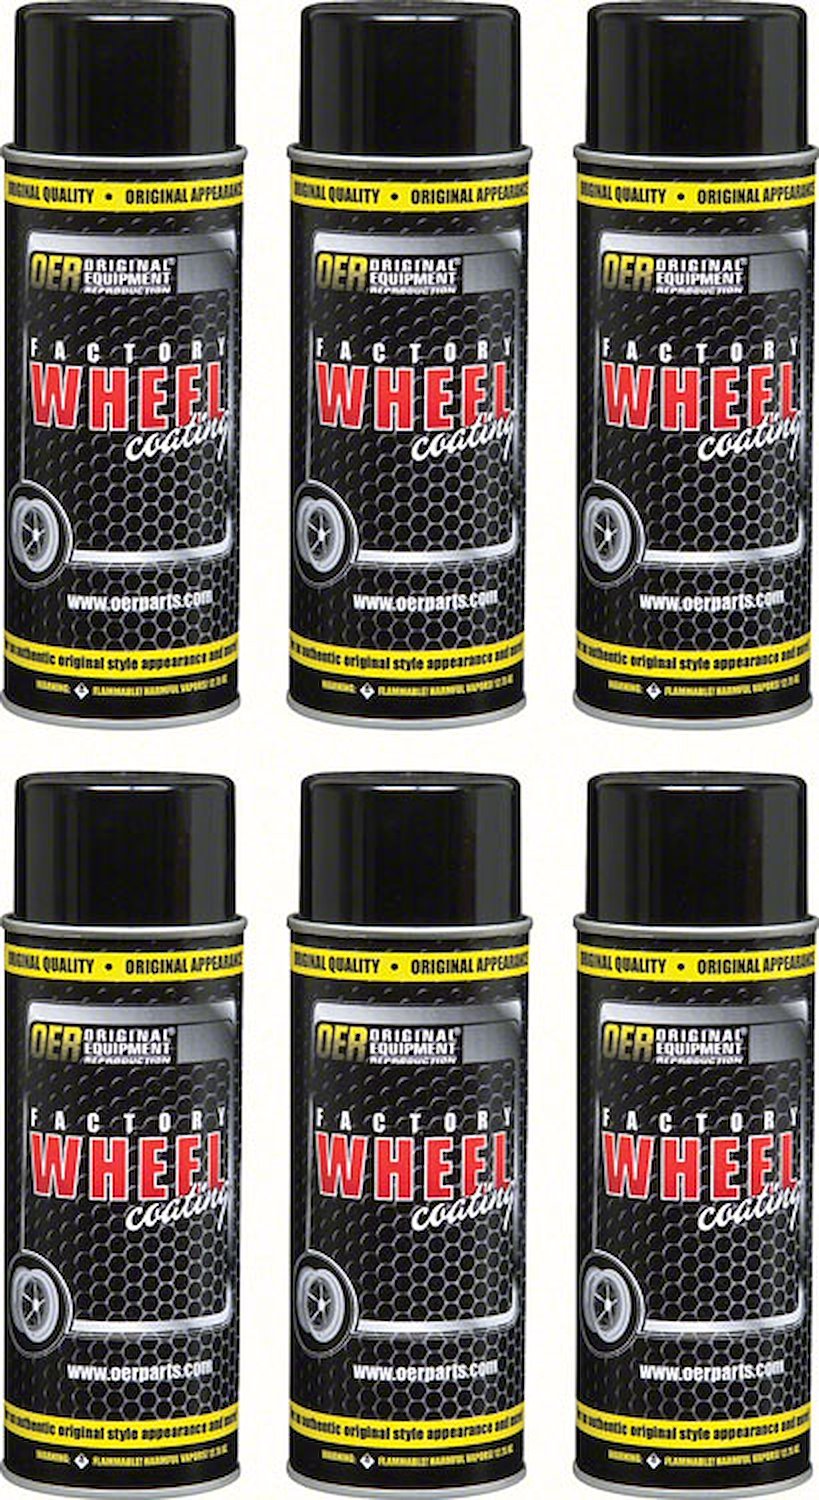 K89411 Wheel Paint 1960-80 Low Luster Gray OER "Factory Wheel Coating" Case of 6-16 Oz Cans